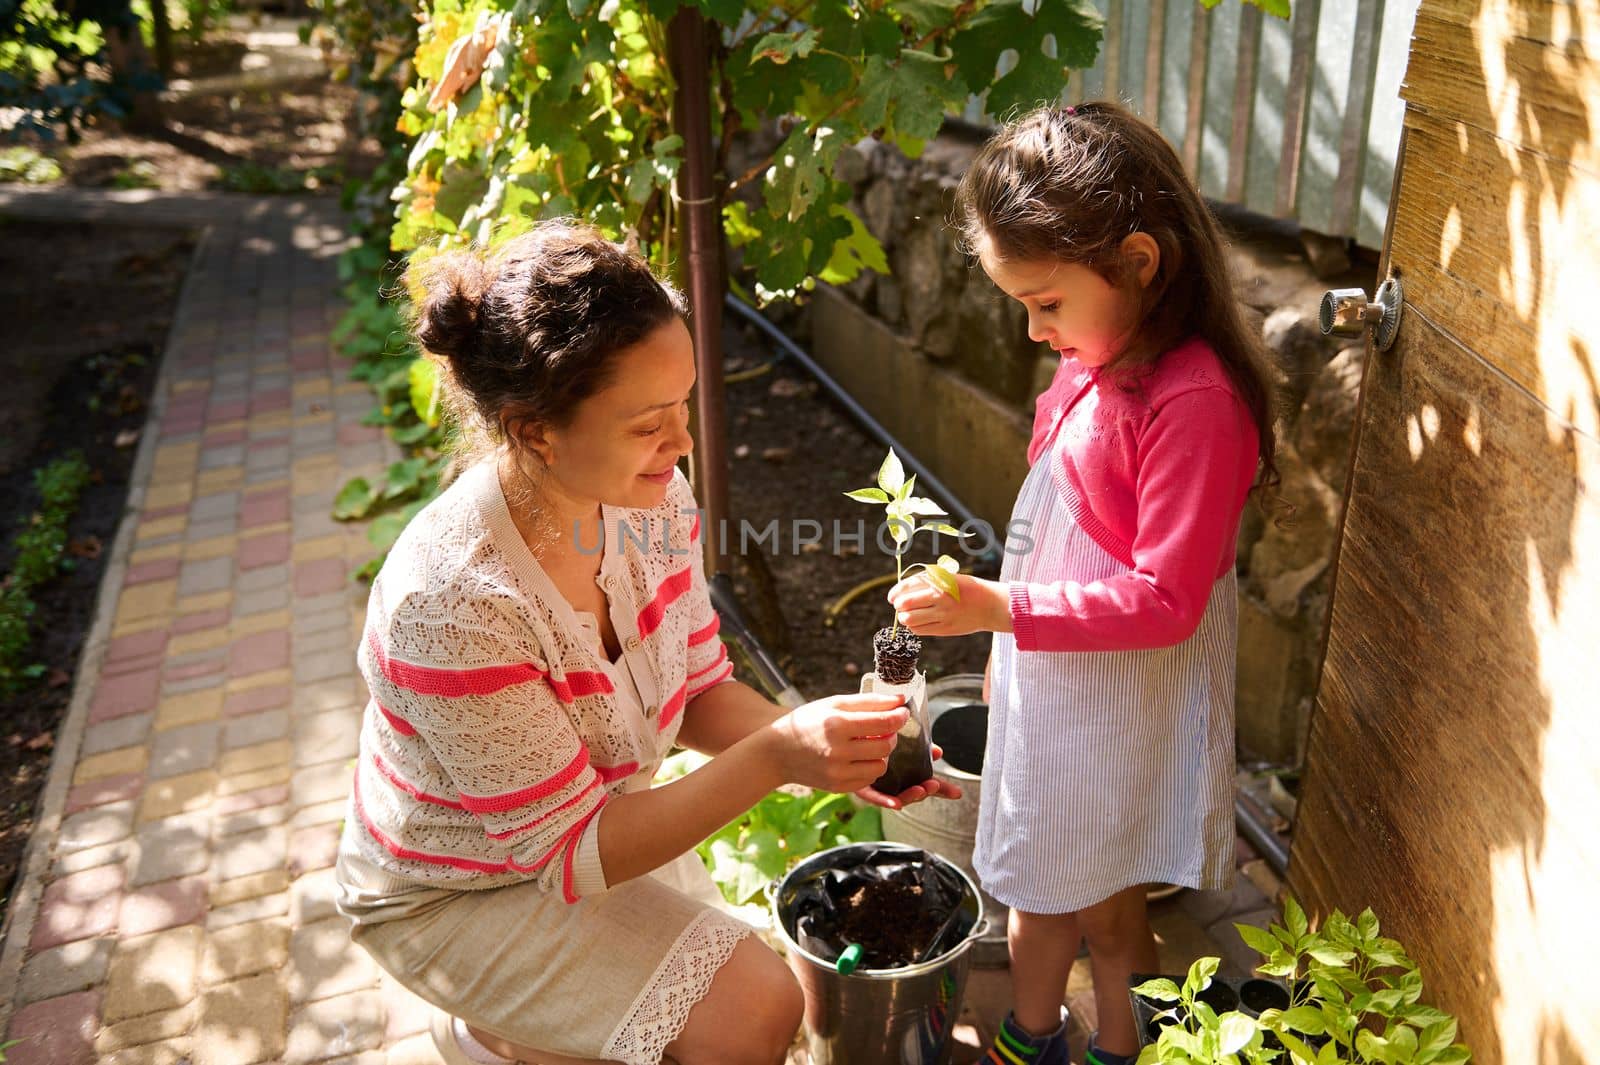 Little girl helps her mother to plant seedlings with sprouted roots during seeding and planting season in early spring by artgf